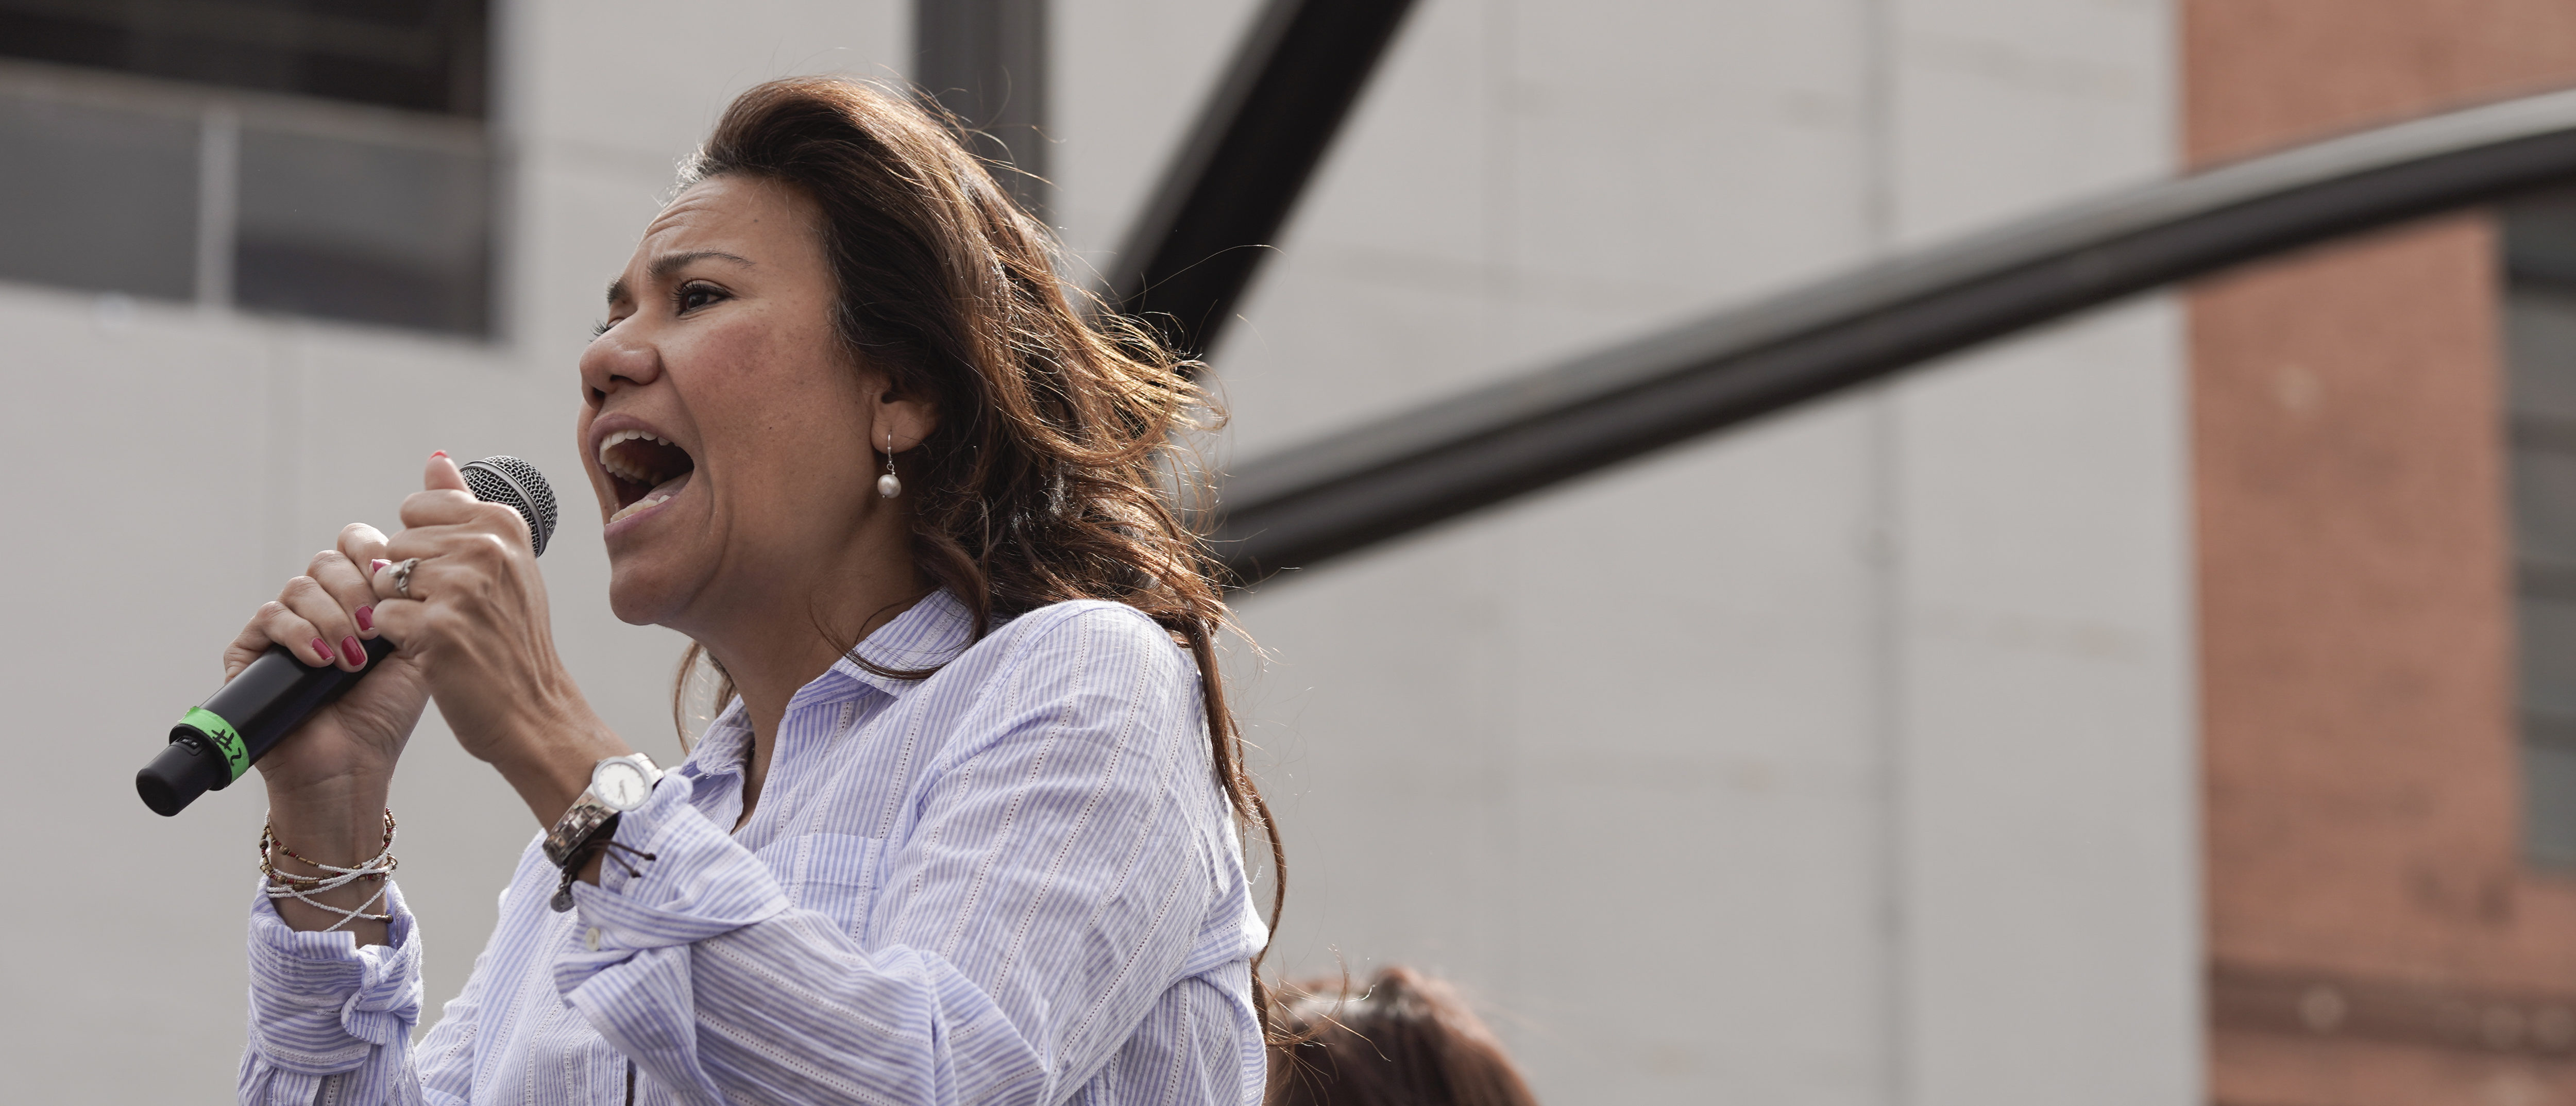 Texas Congresswoman Veronica Escobar speaks to Beto O'Rourke supporters during Beto O'Rourke's presidential campaign kickoff rally downtown El Paso, Texas on March 30, 2019. - After running a close race for Texas senate against Senator Ted Cruz, ORourke is now a major contender in the Democratic primary race. (Photo by PAUL RATJE / AFP)